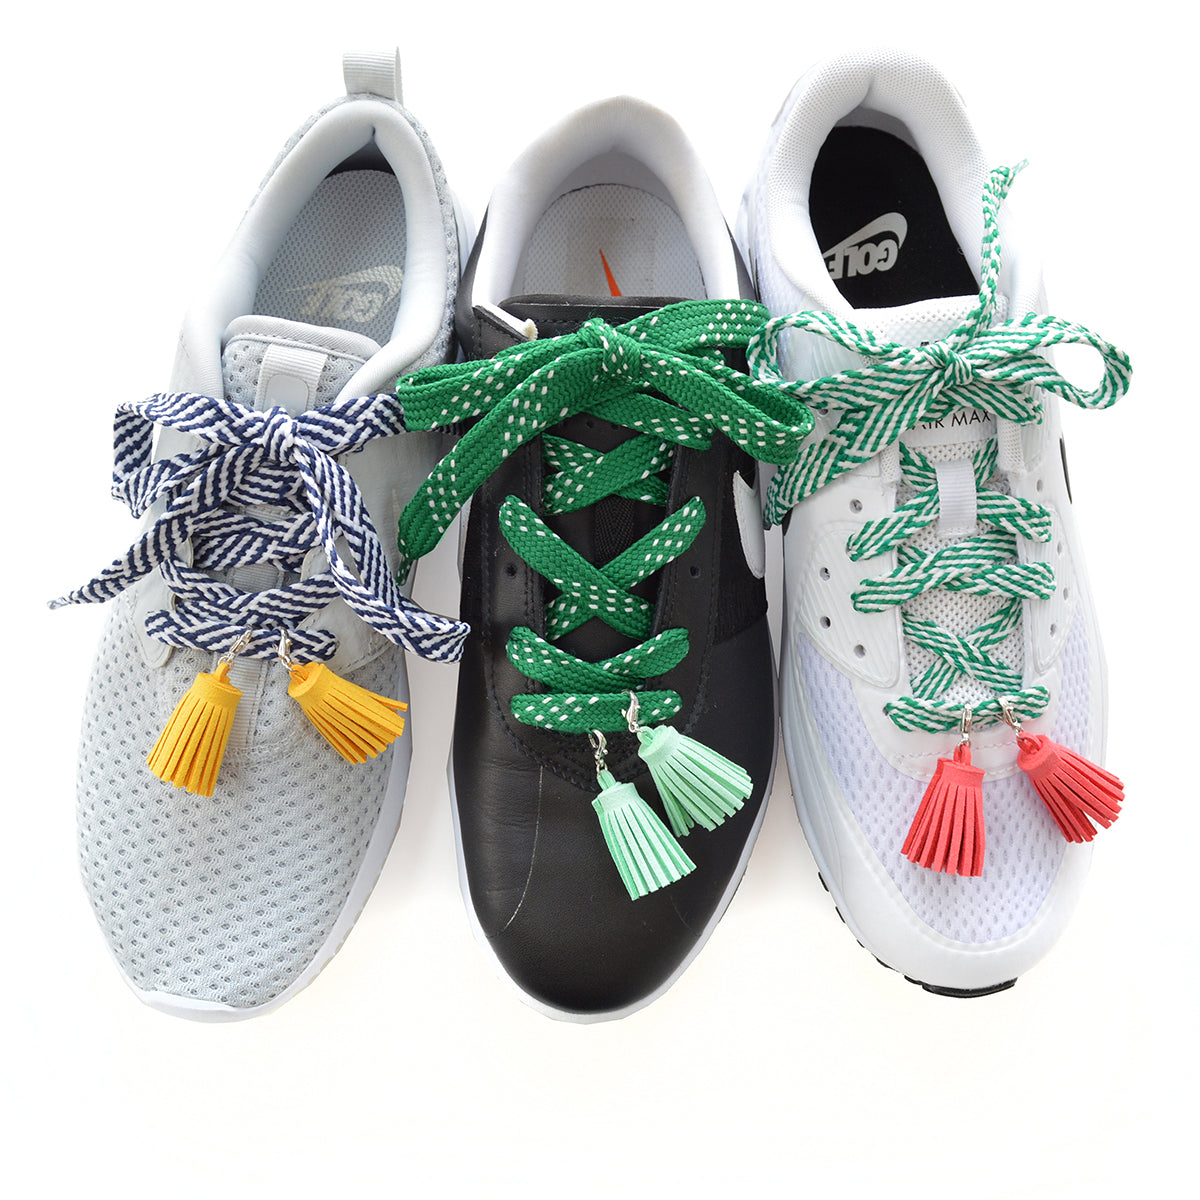 JUST IN! Limited edition shoe tassels (2pc)